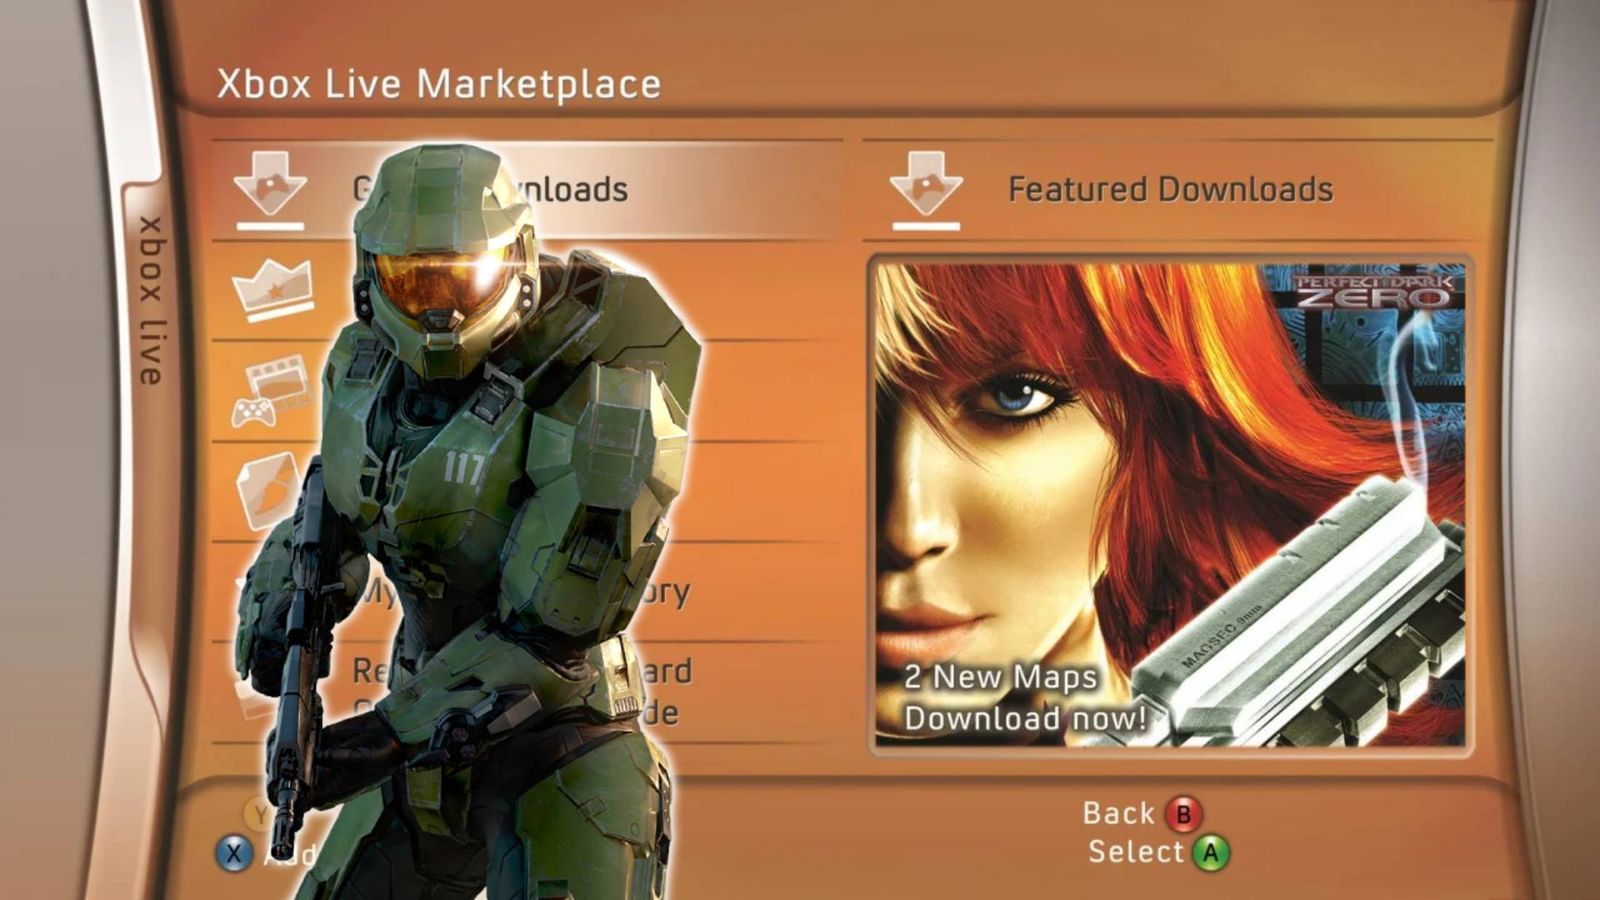 Master Chief is standing next to Joanna Dark in the Xbox 360 Blades OS